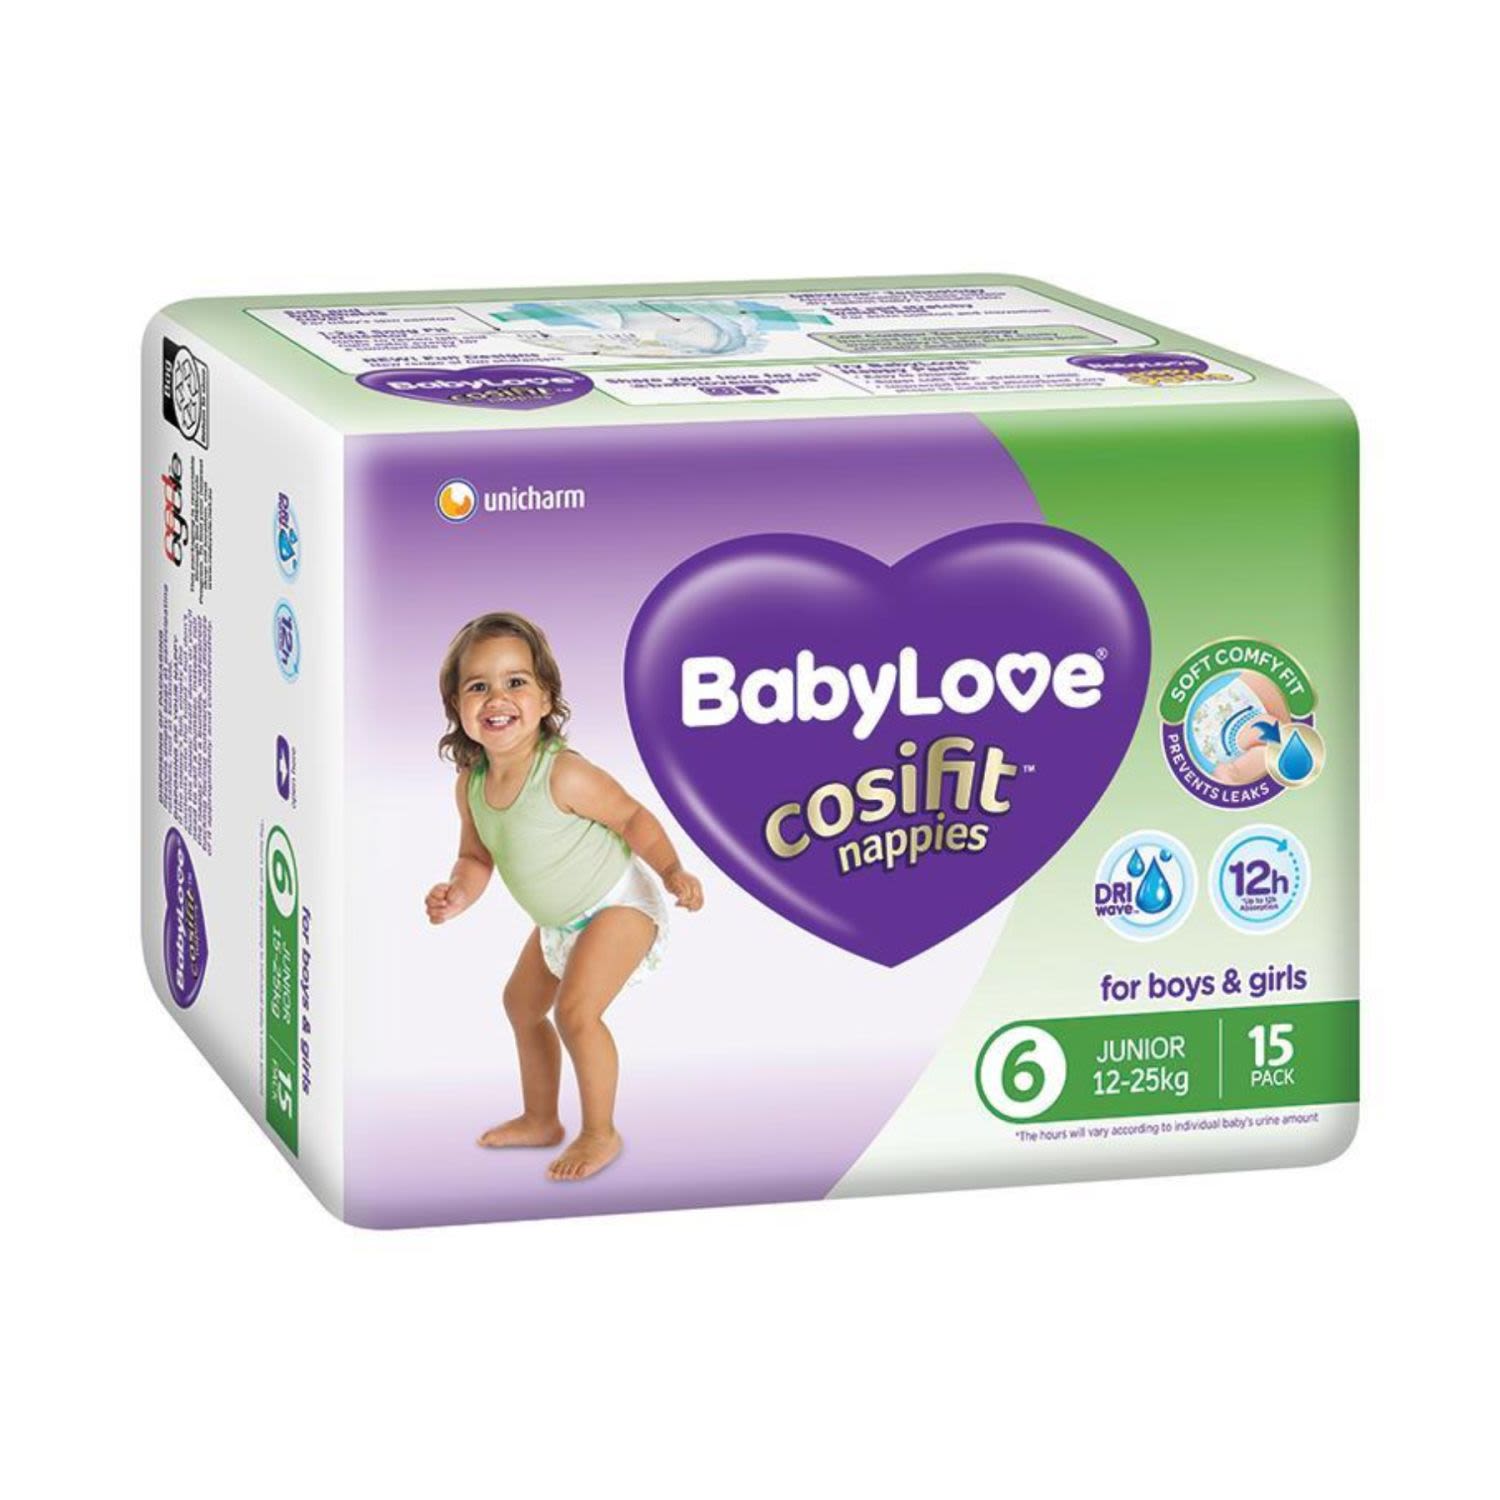 BabyLove Cosifit Nappies Junior Size 6, 15 Each